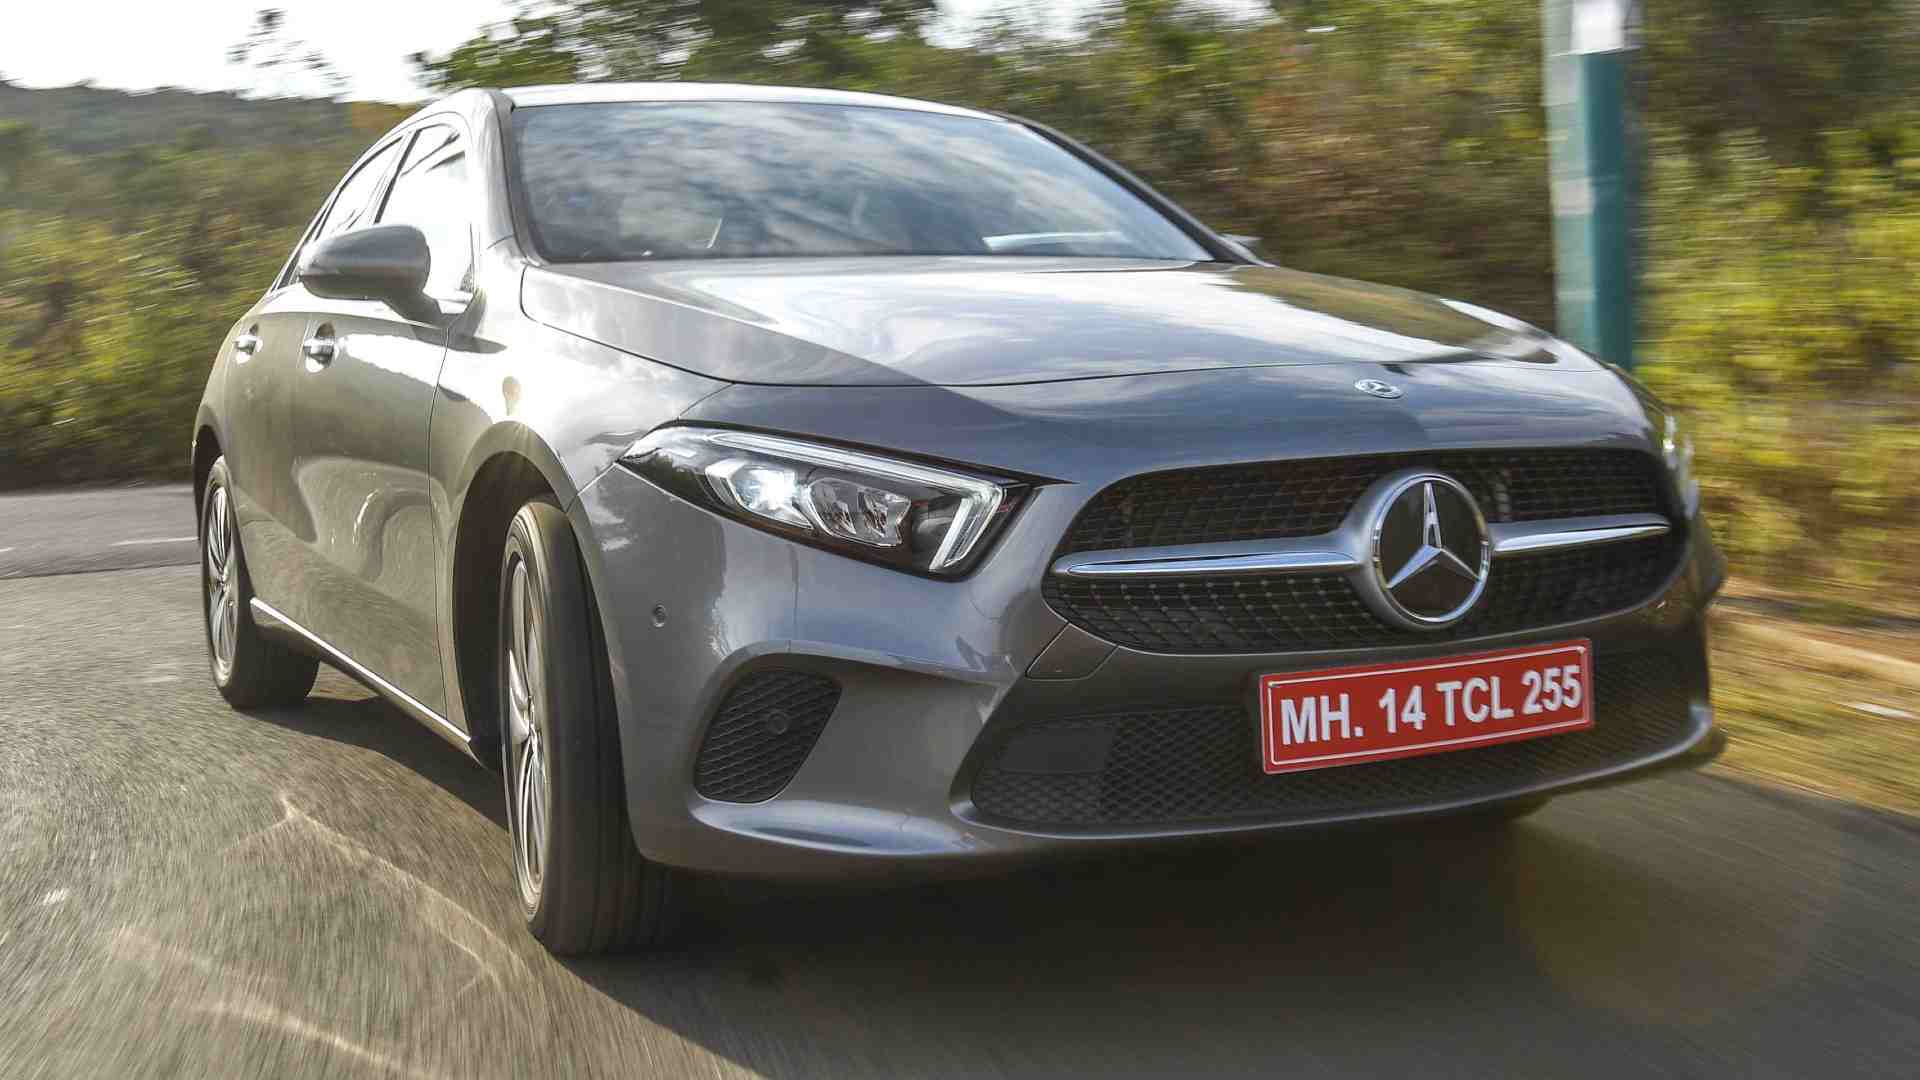  Entry-level-up: Mercedes-Benz A-Class Limousine India review